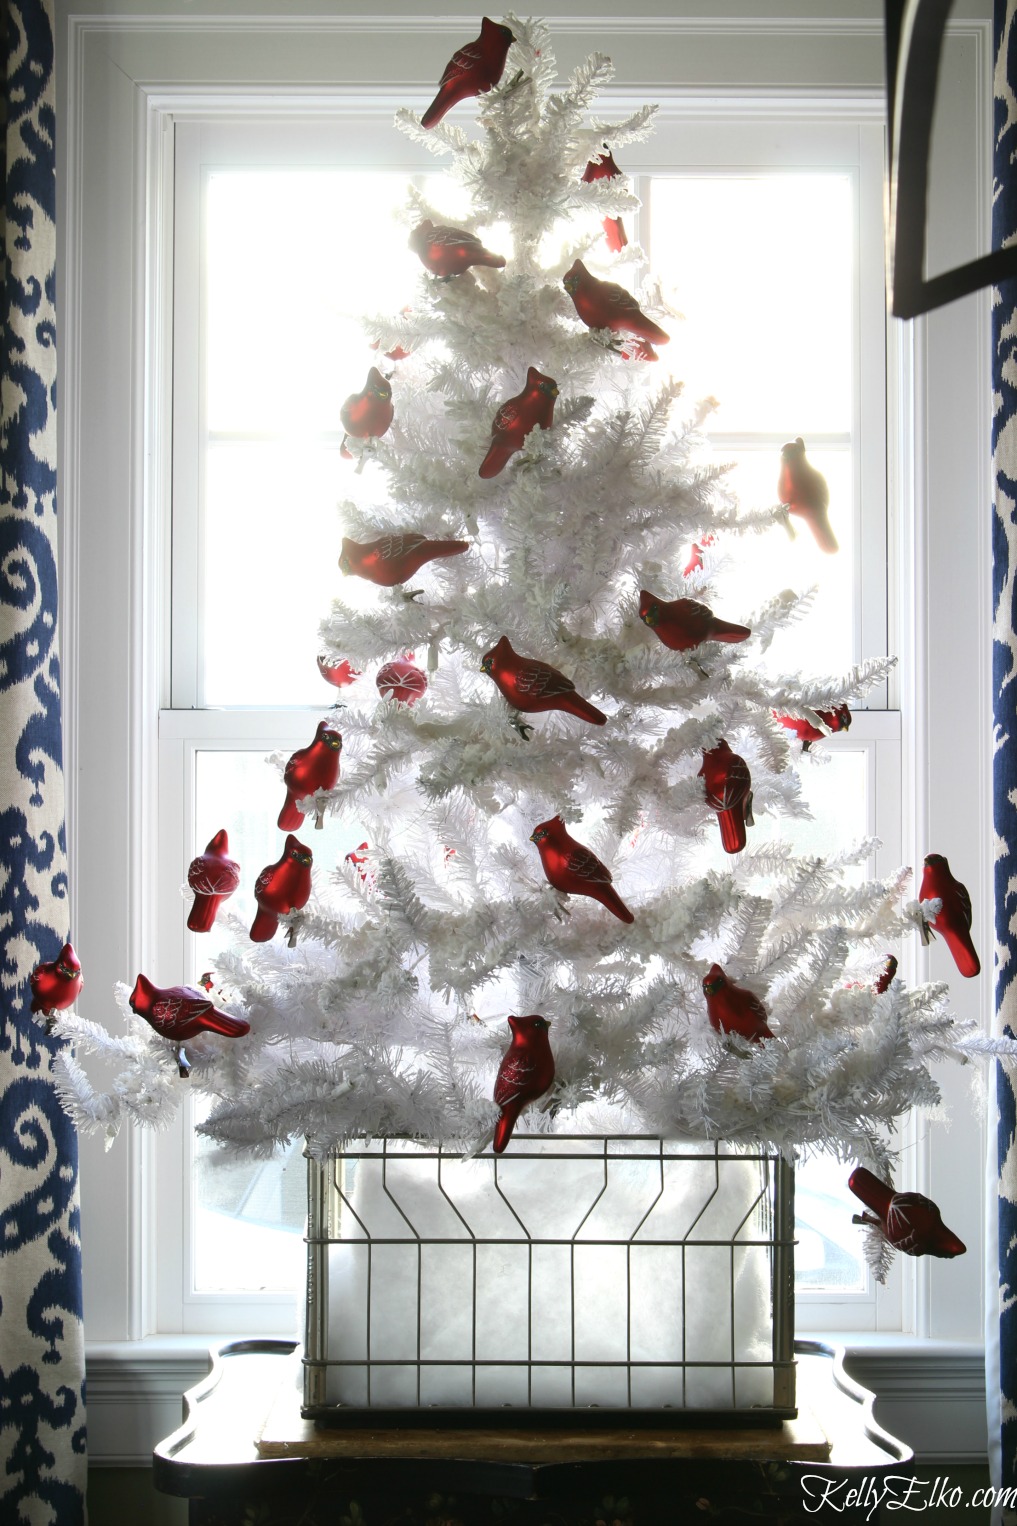 Love this flocked white Christmas tree with a flock of red cardinal ornaments kellyelko.com 